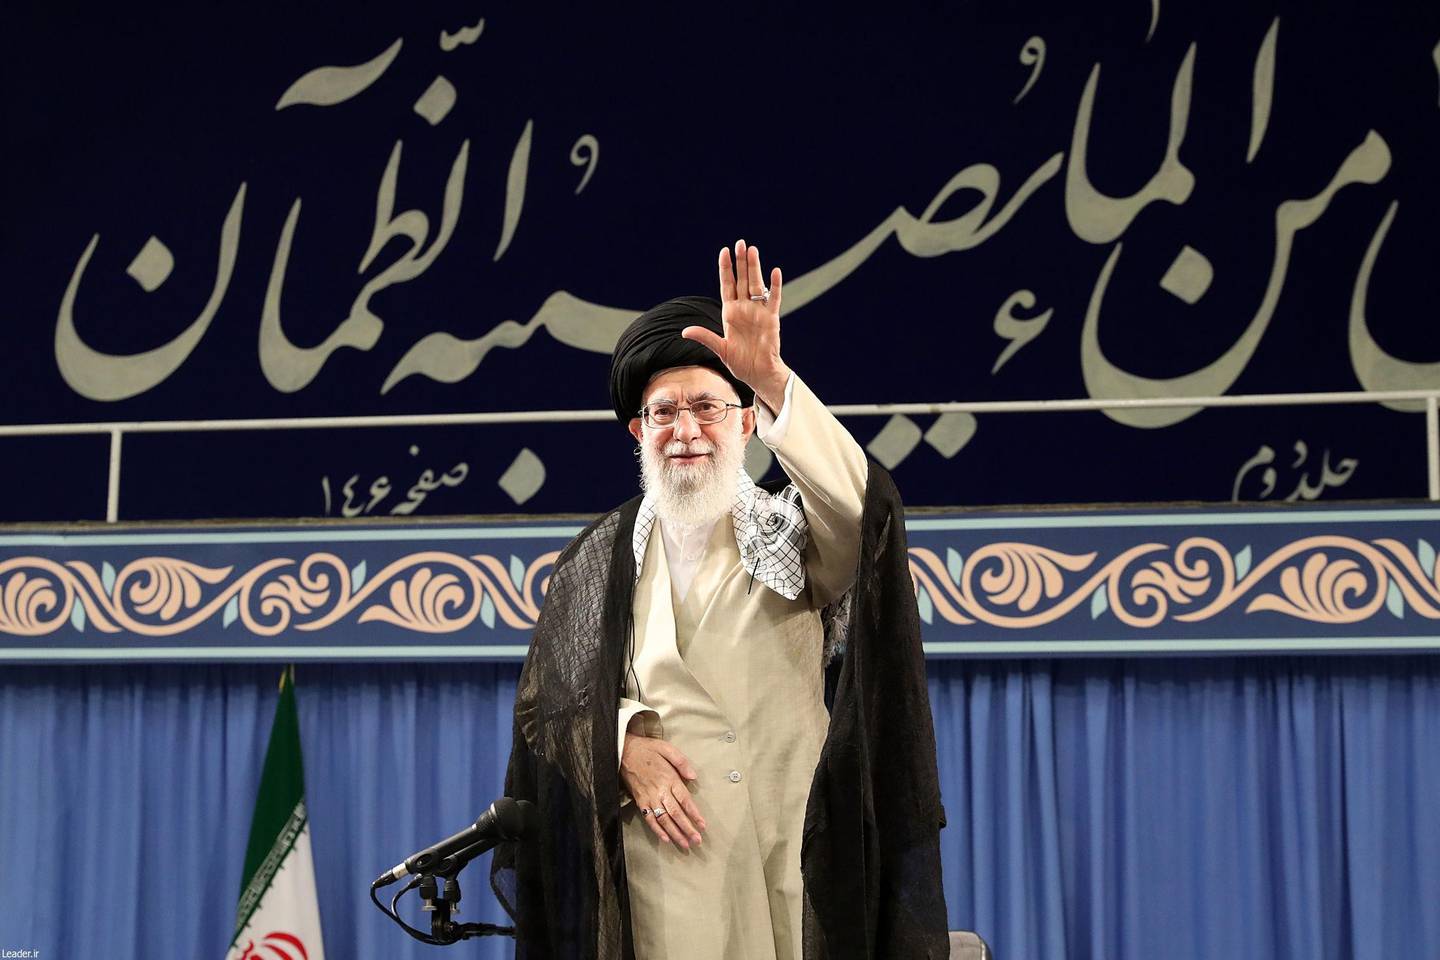 A handout picture provided by the office of Iran's Supreme Leader Ayatollah Ali Khamenei on June 26, 2019 shows him delivering a speech during a gathering of Judiciary authorities in the Islamic republic's capital Tehran. - Tehran accuses Washington of waging economic warfare through its crippling sanctions regime, which on this week saw Iran's supreme leader blacklisted. The Trump administration says it is open to talks with Tehran, an offer flatly rejected by the Iranian president after the US said it would also sanction his top diplomat. (Photo by HO / KHAMENEI.IR / AFP) / === RESTRICTED TO EDITORIAL USE - MANDATORY CREDIT "AFP PHOTO / HO / KHAMENEI.IR" - NO MARKETING NO ADVERTISING CAMPAIGNS - DISTRIBUTED AS A SERVICE TO CLIENTS ===